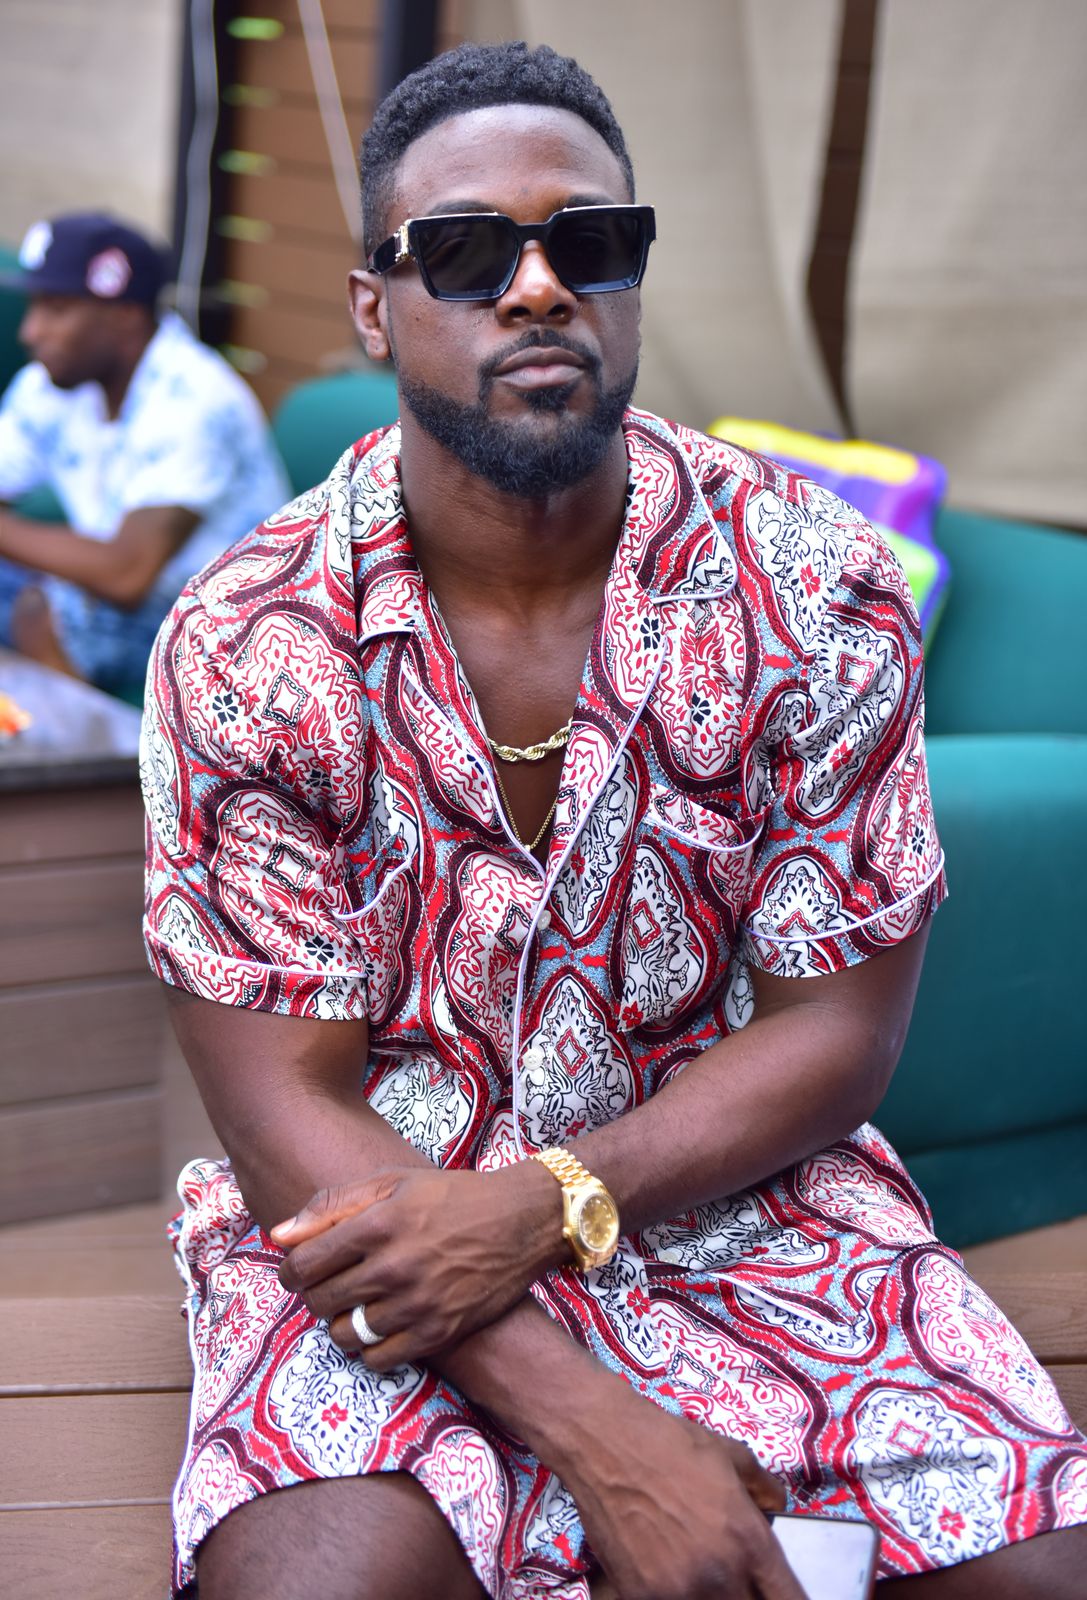 Lance Gross at Official Luda Day Party at Elleven45 on August 31, 2019 in Atlanta, Georgia. | Photo: Getty Images